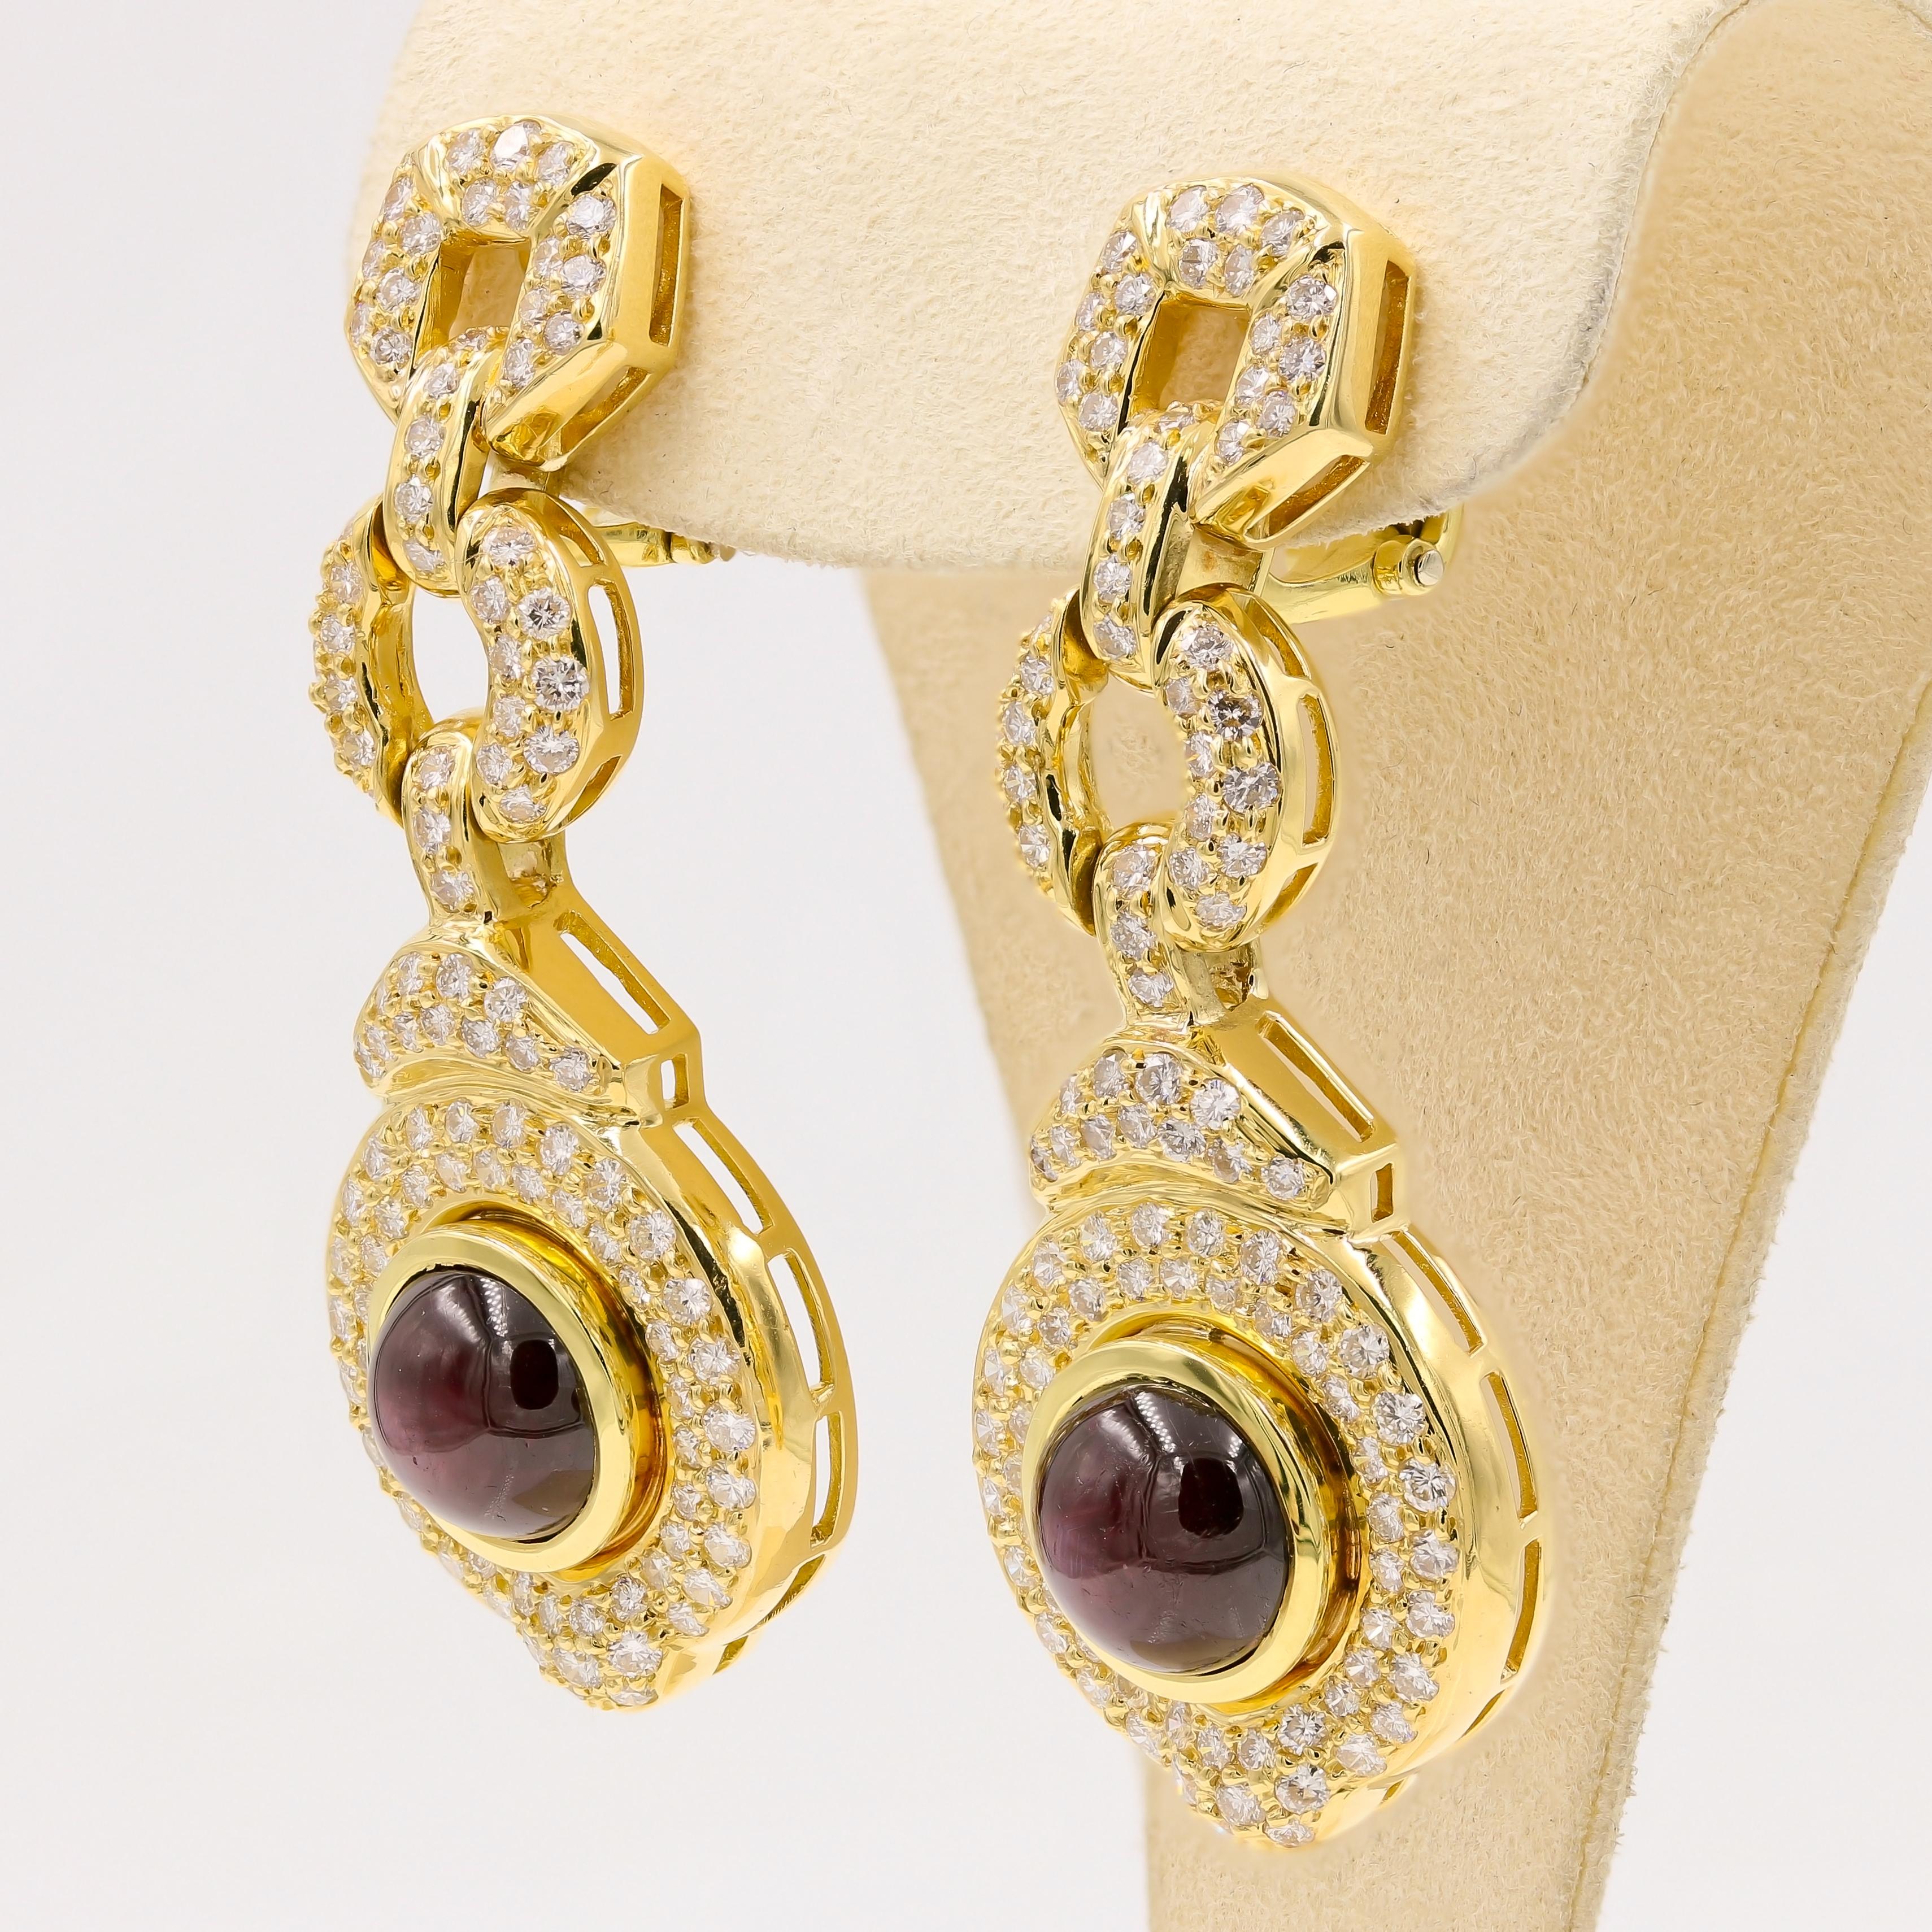 16.97 Carat Cabochon Cut Star Ruby and Diamond Earrings in 18 Karat Yellow Gold In New Condition For Sale In Chicago, IL